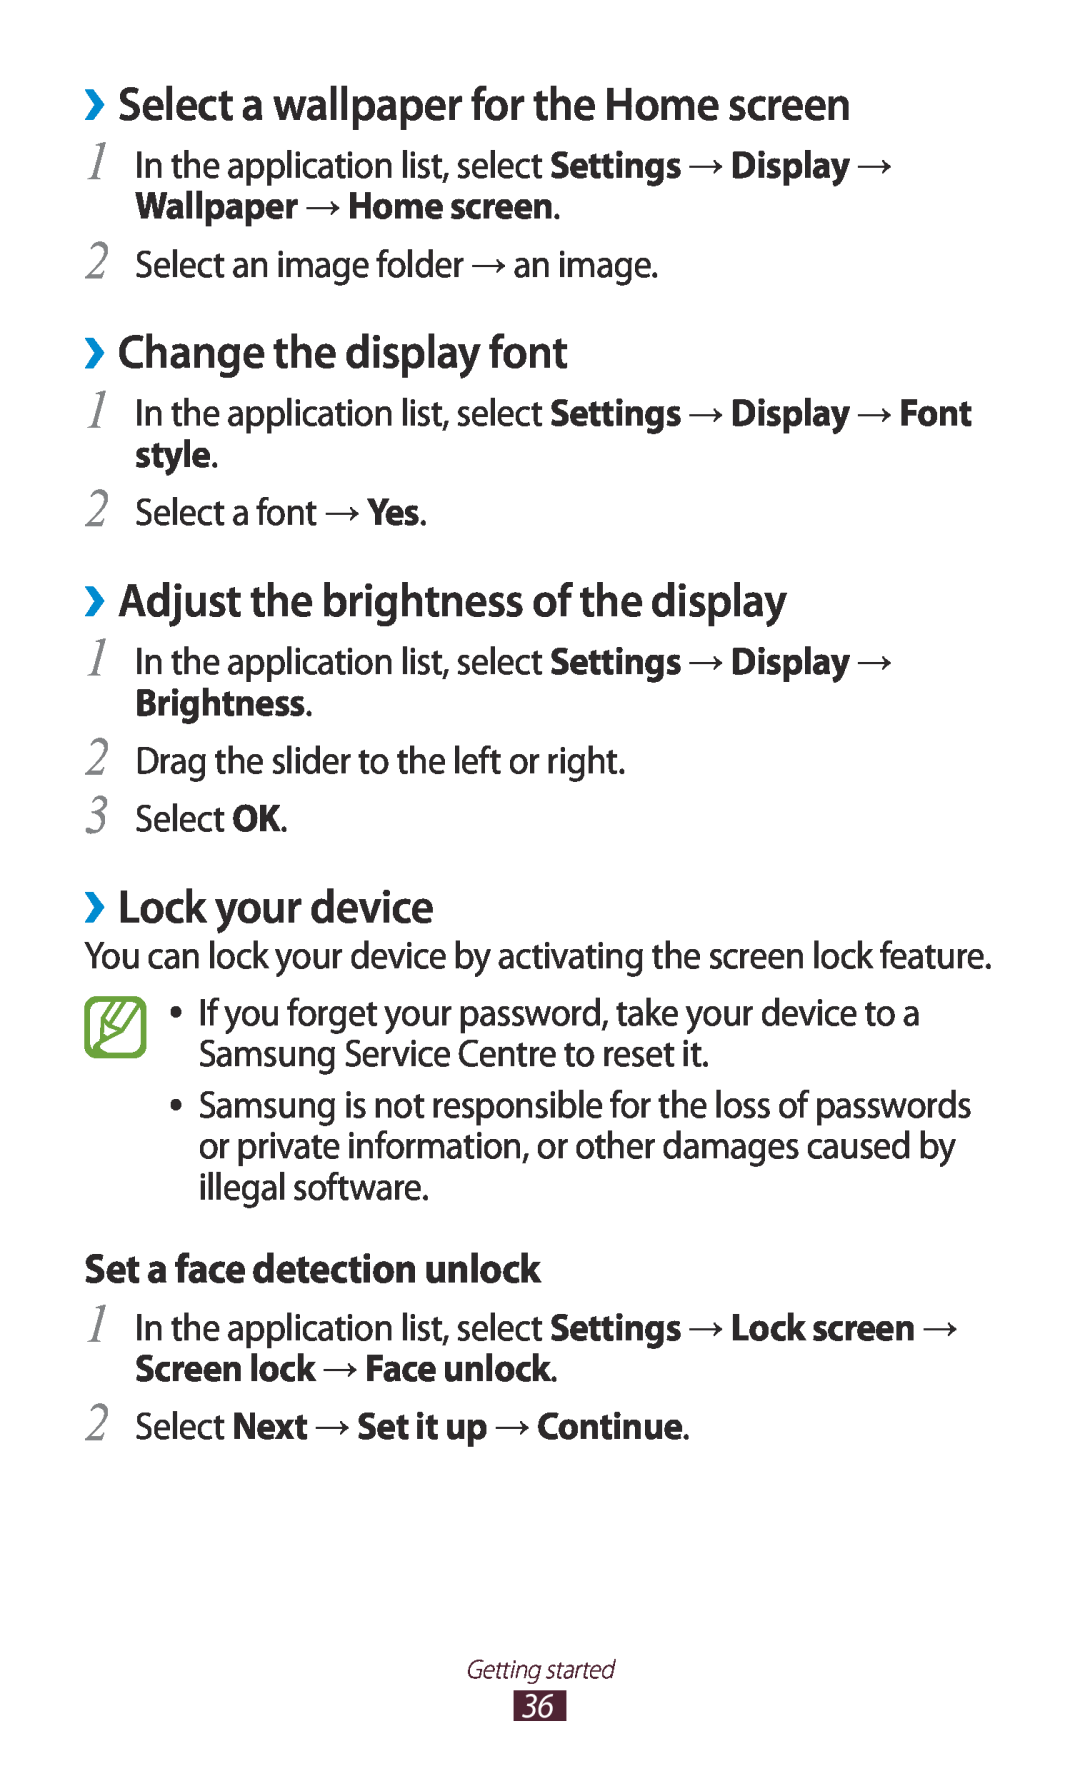 Samsung GT-I8160ZWATPH manual ››Select a wallpaper for the Home screen, ››Change the display font, ››Lock your device 